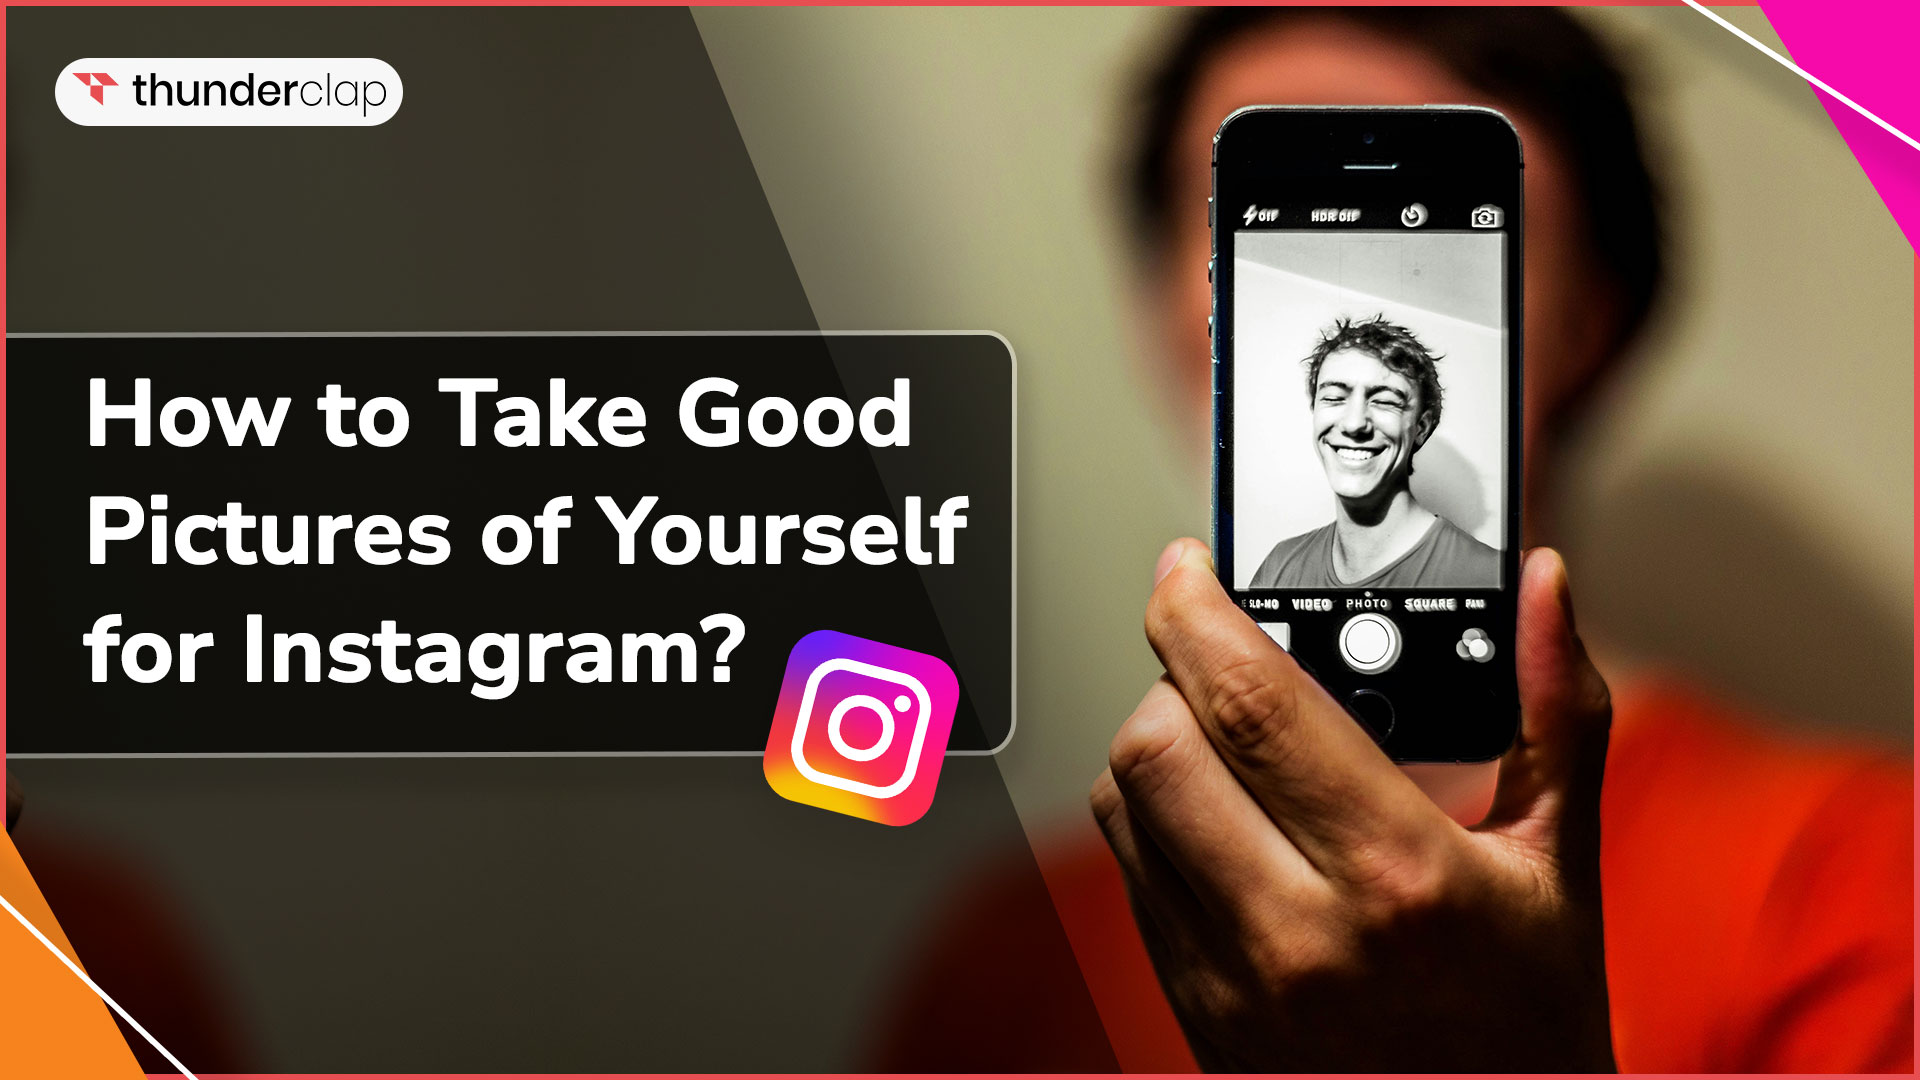 How to Take Good Pictures of Yourself for Instagram